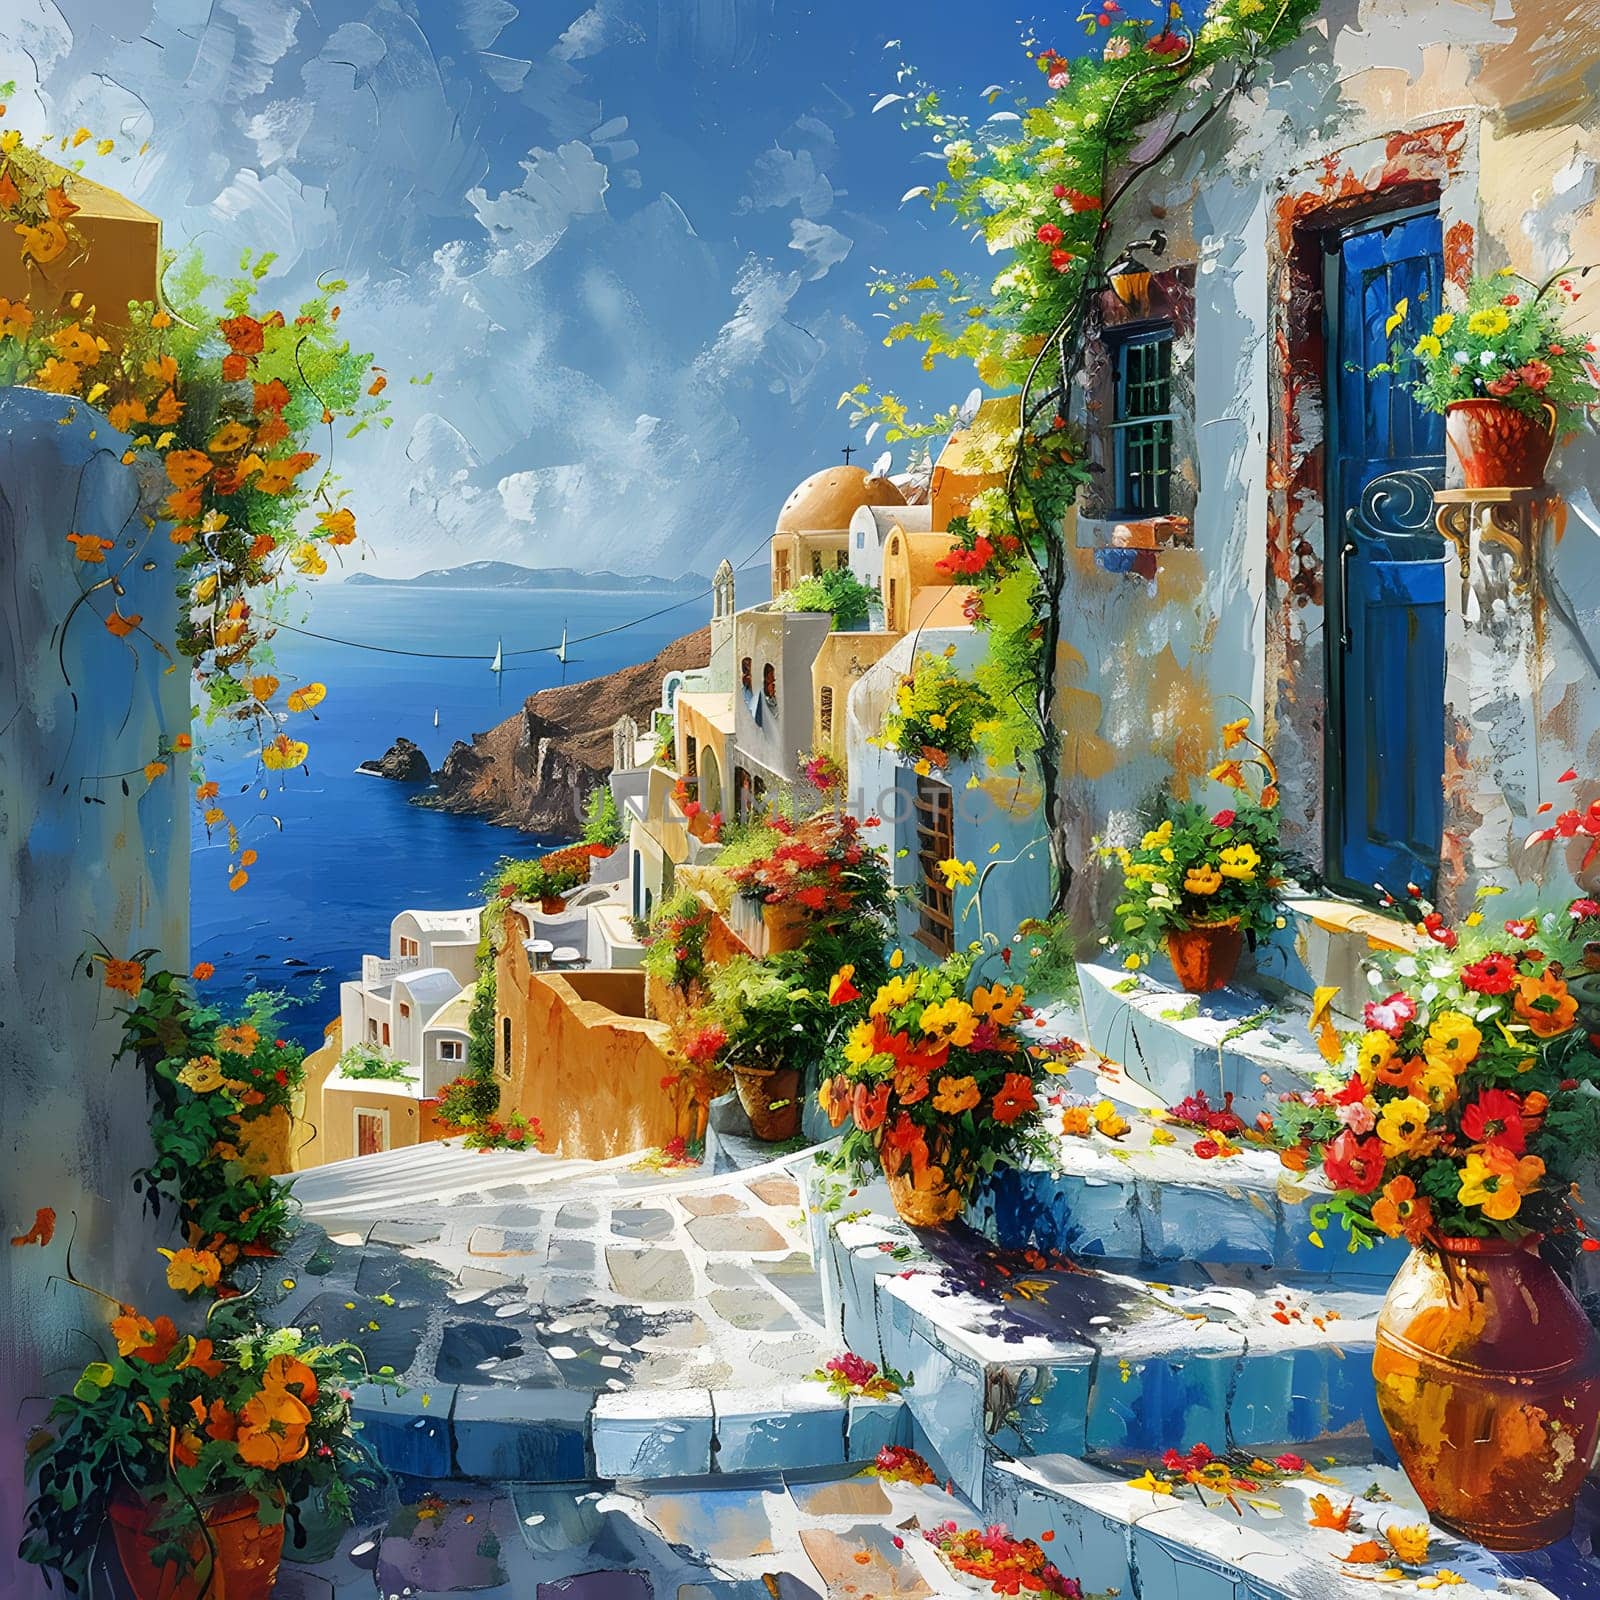 Stairs painted Azure leading up to a House with Flowers in Flowerpots by Nadtochiy